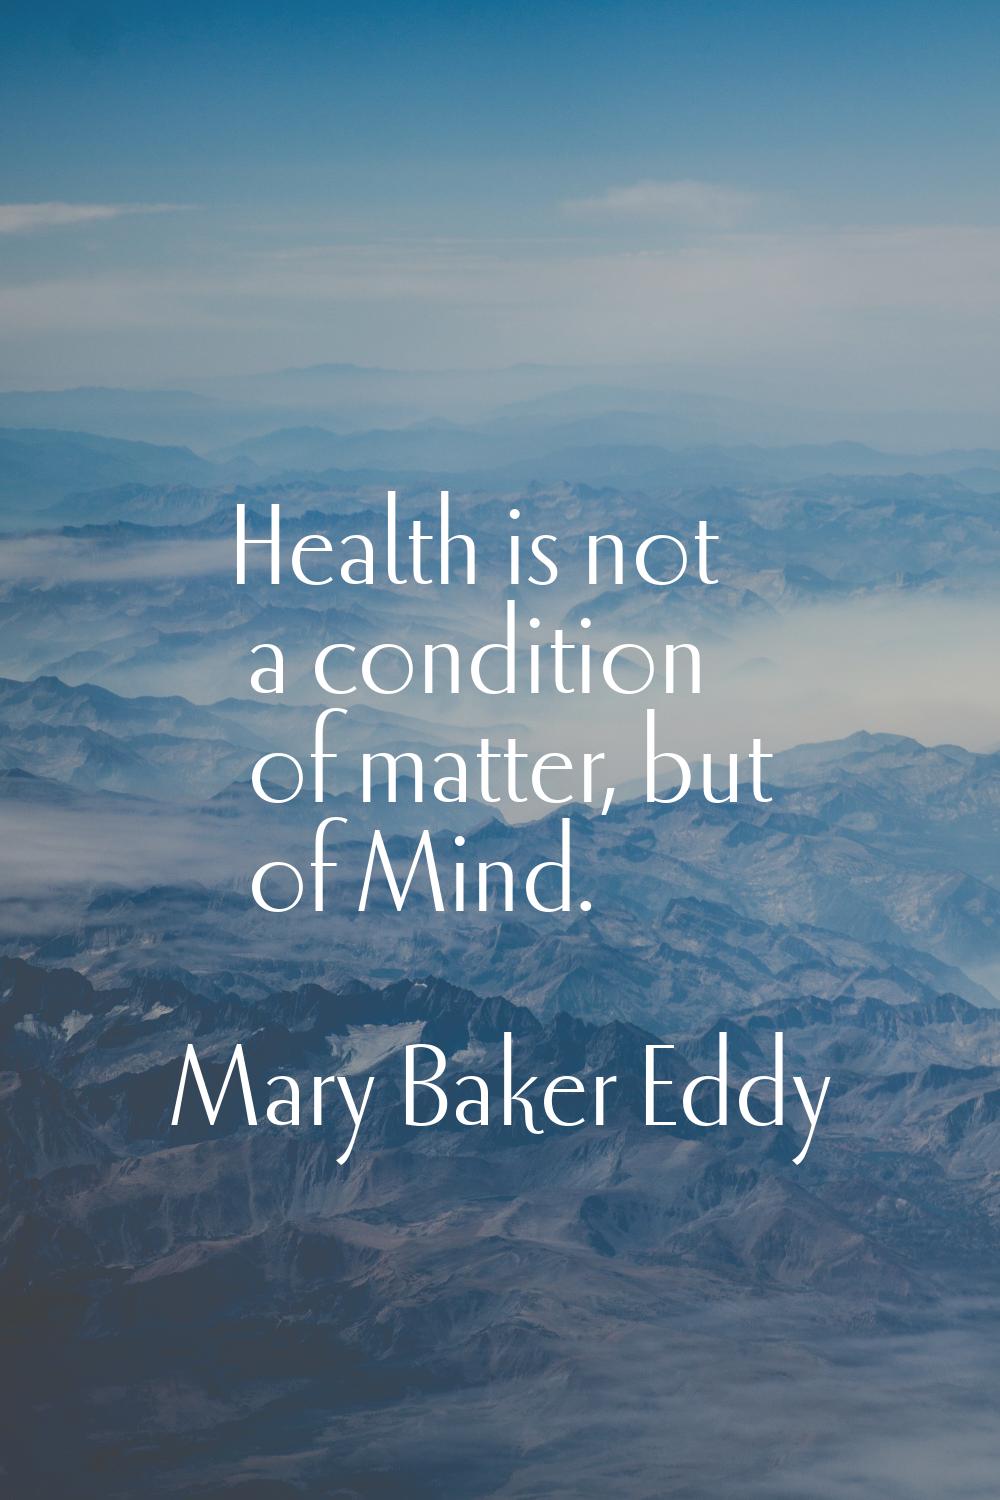 Health is not a condition of matter, but of Mind.